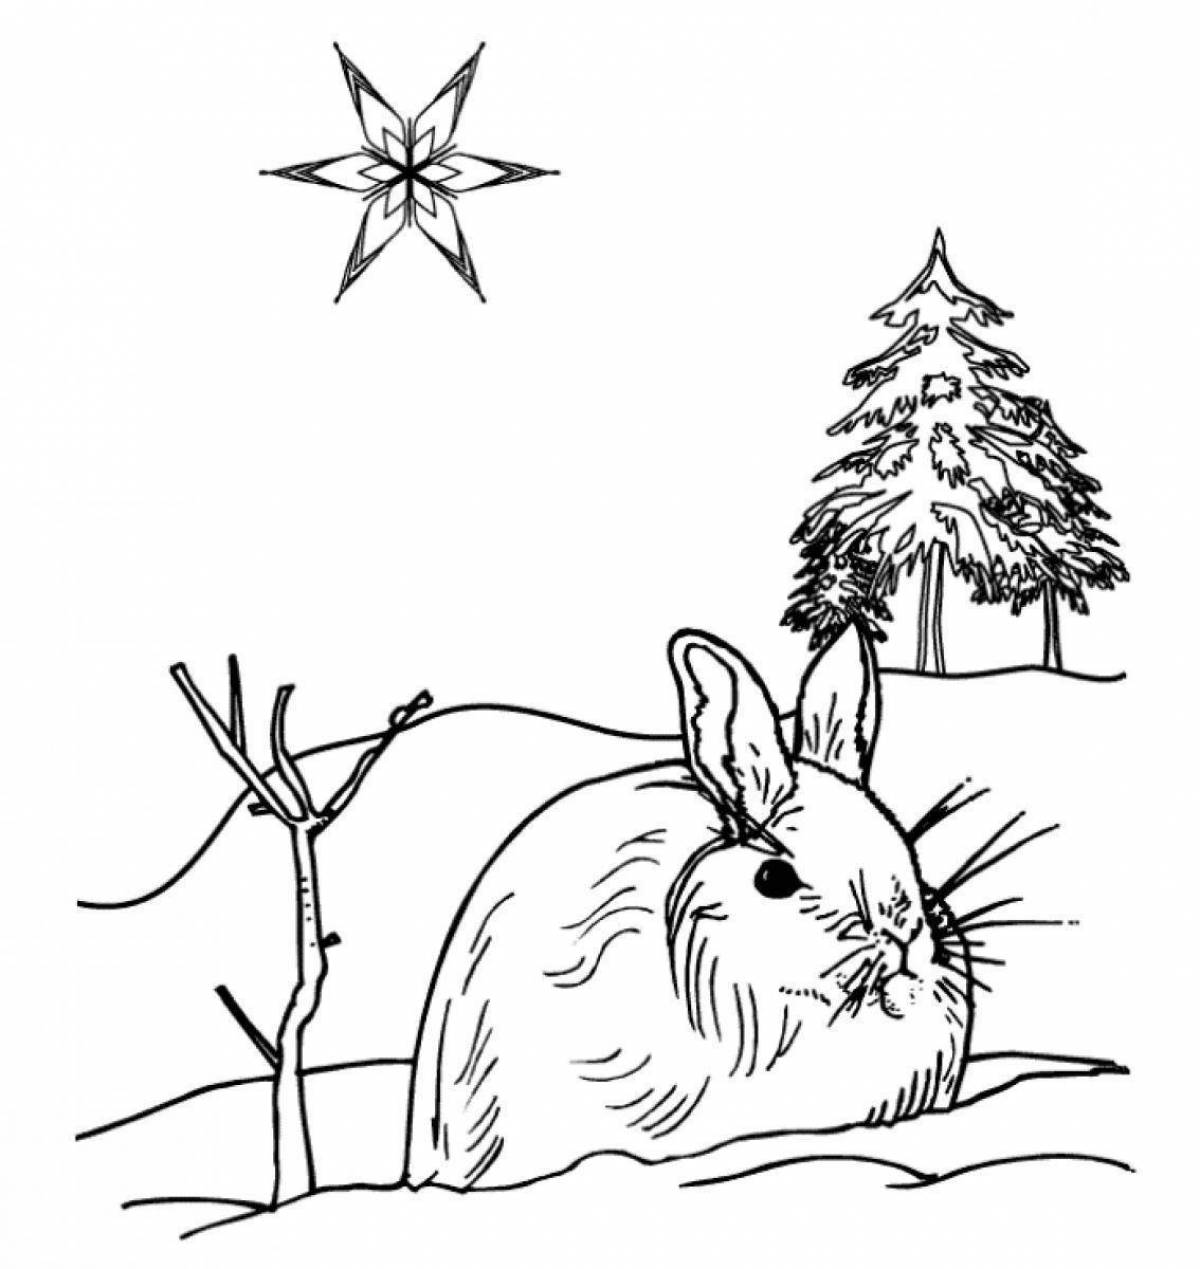 Coloring page glorious winter in the forest